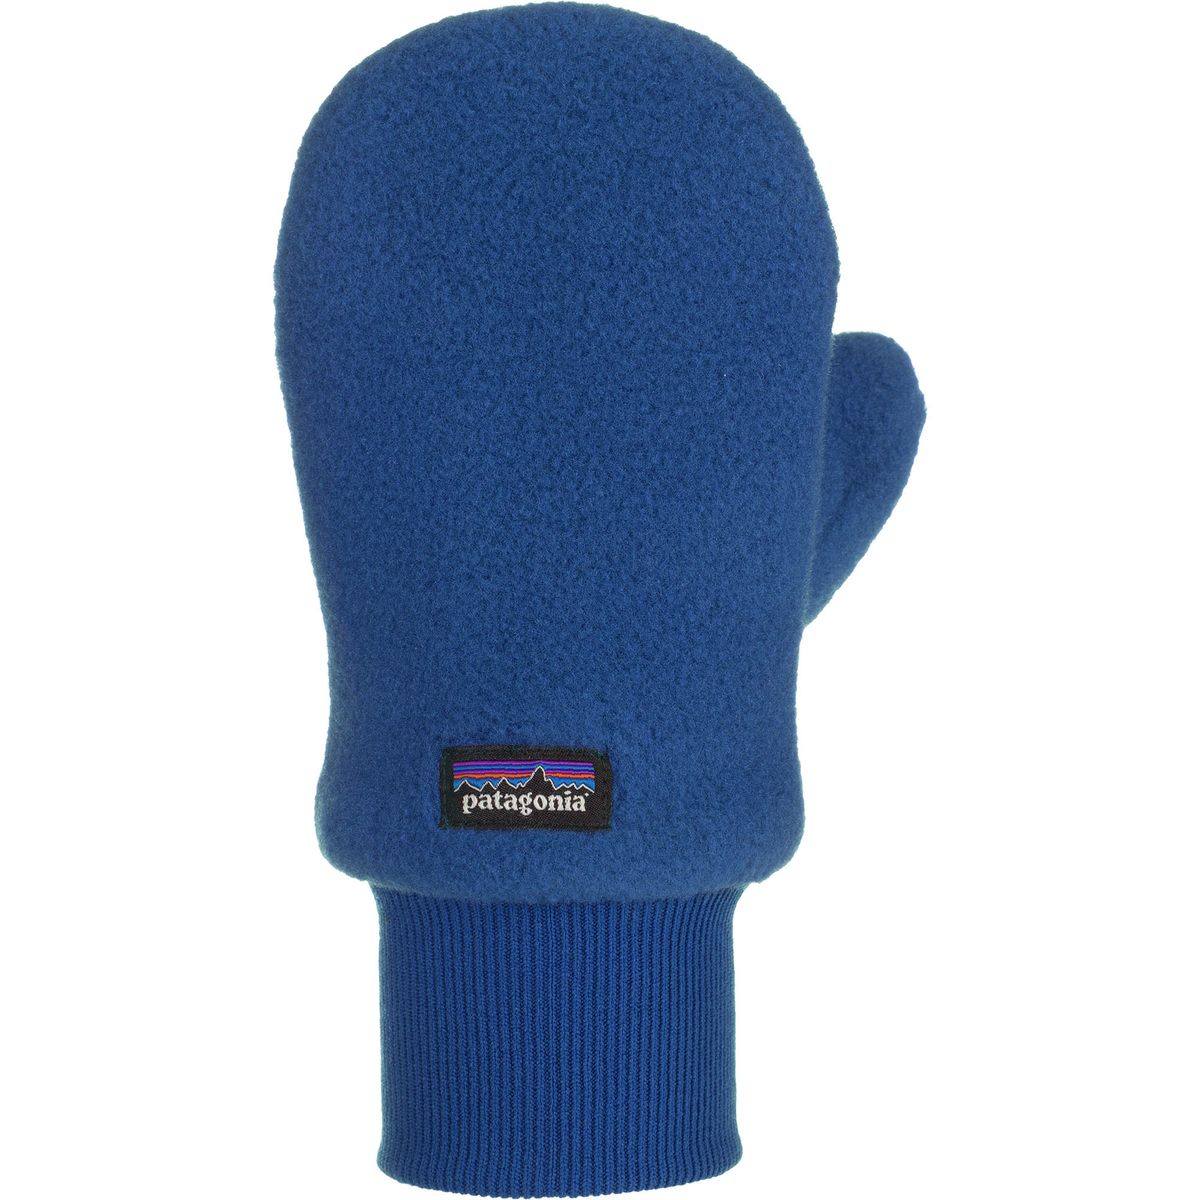 Kids - Gear - Gloves and Mittens